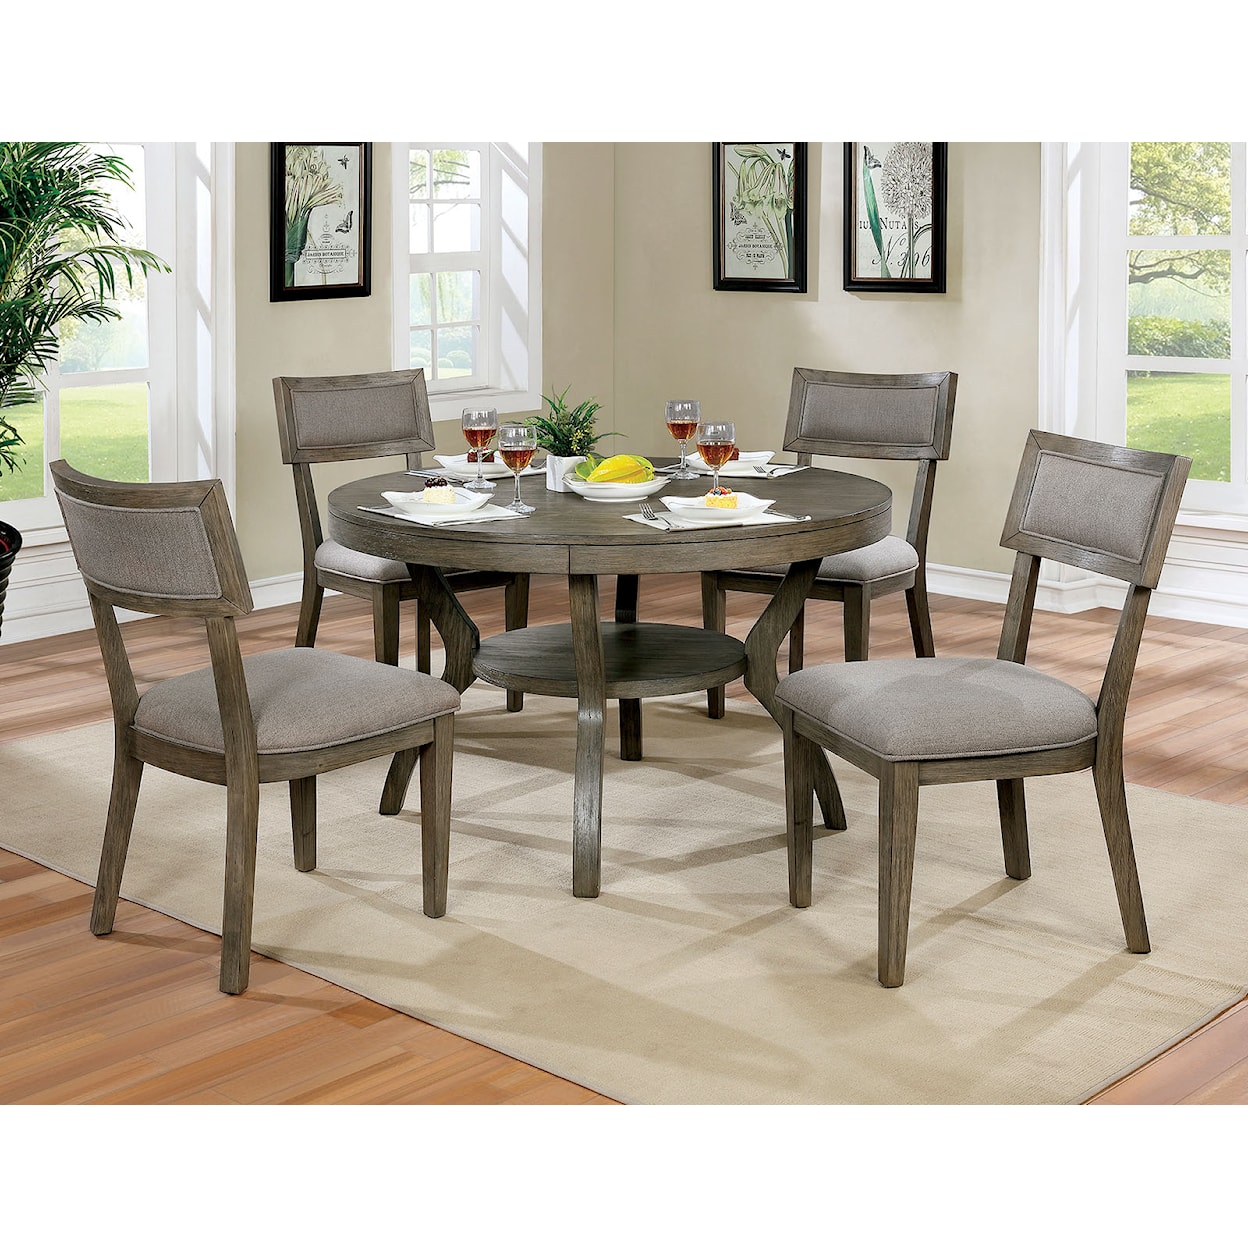 Furniture of America Leeds Round Dining Table Set